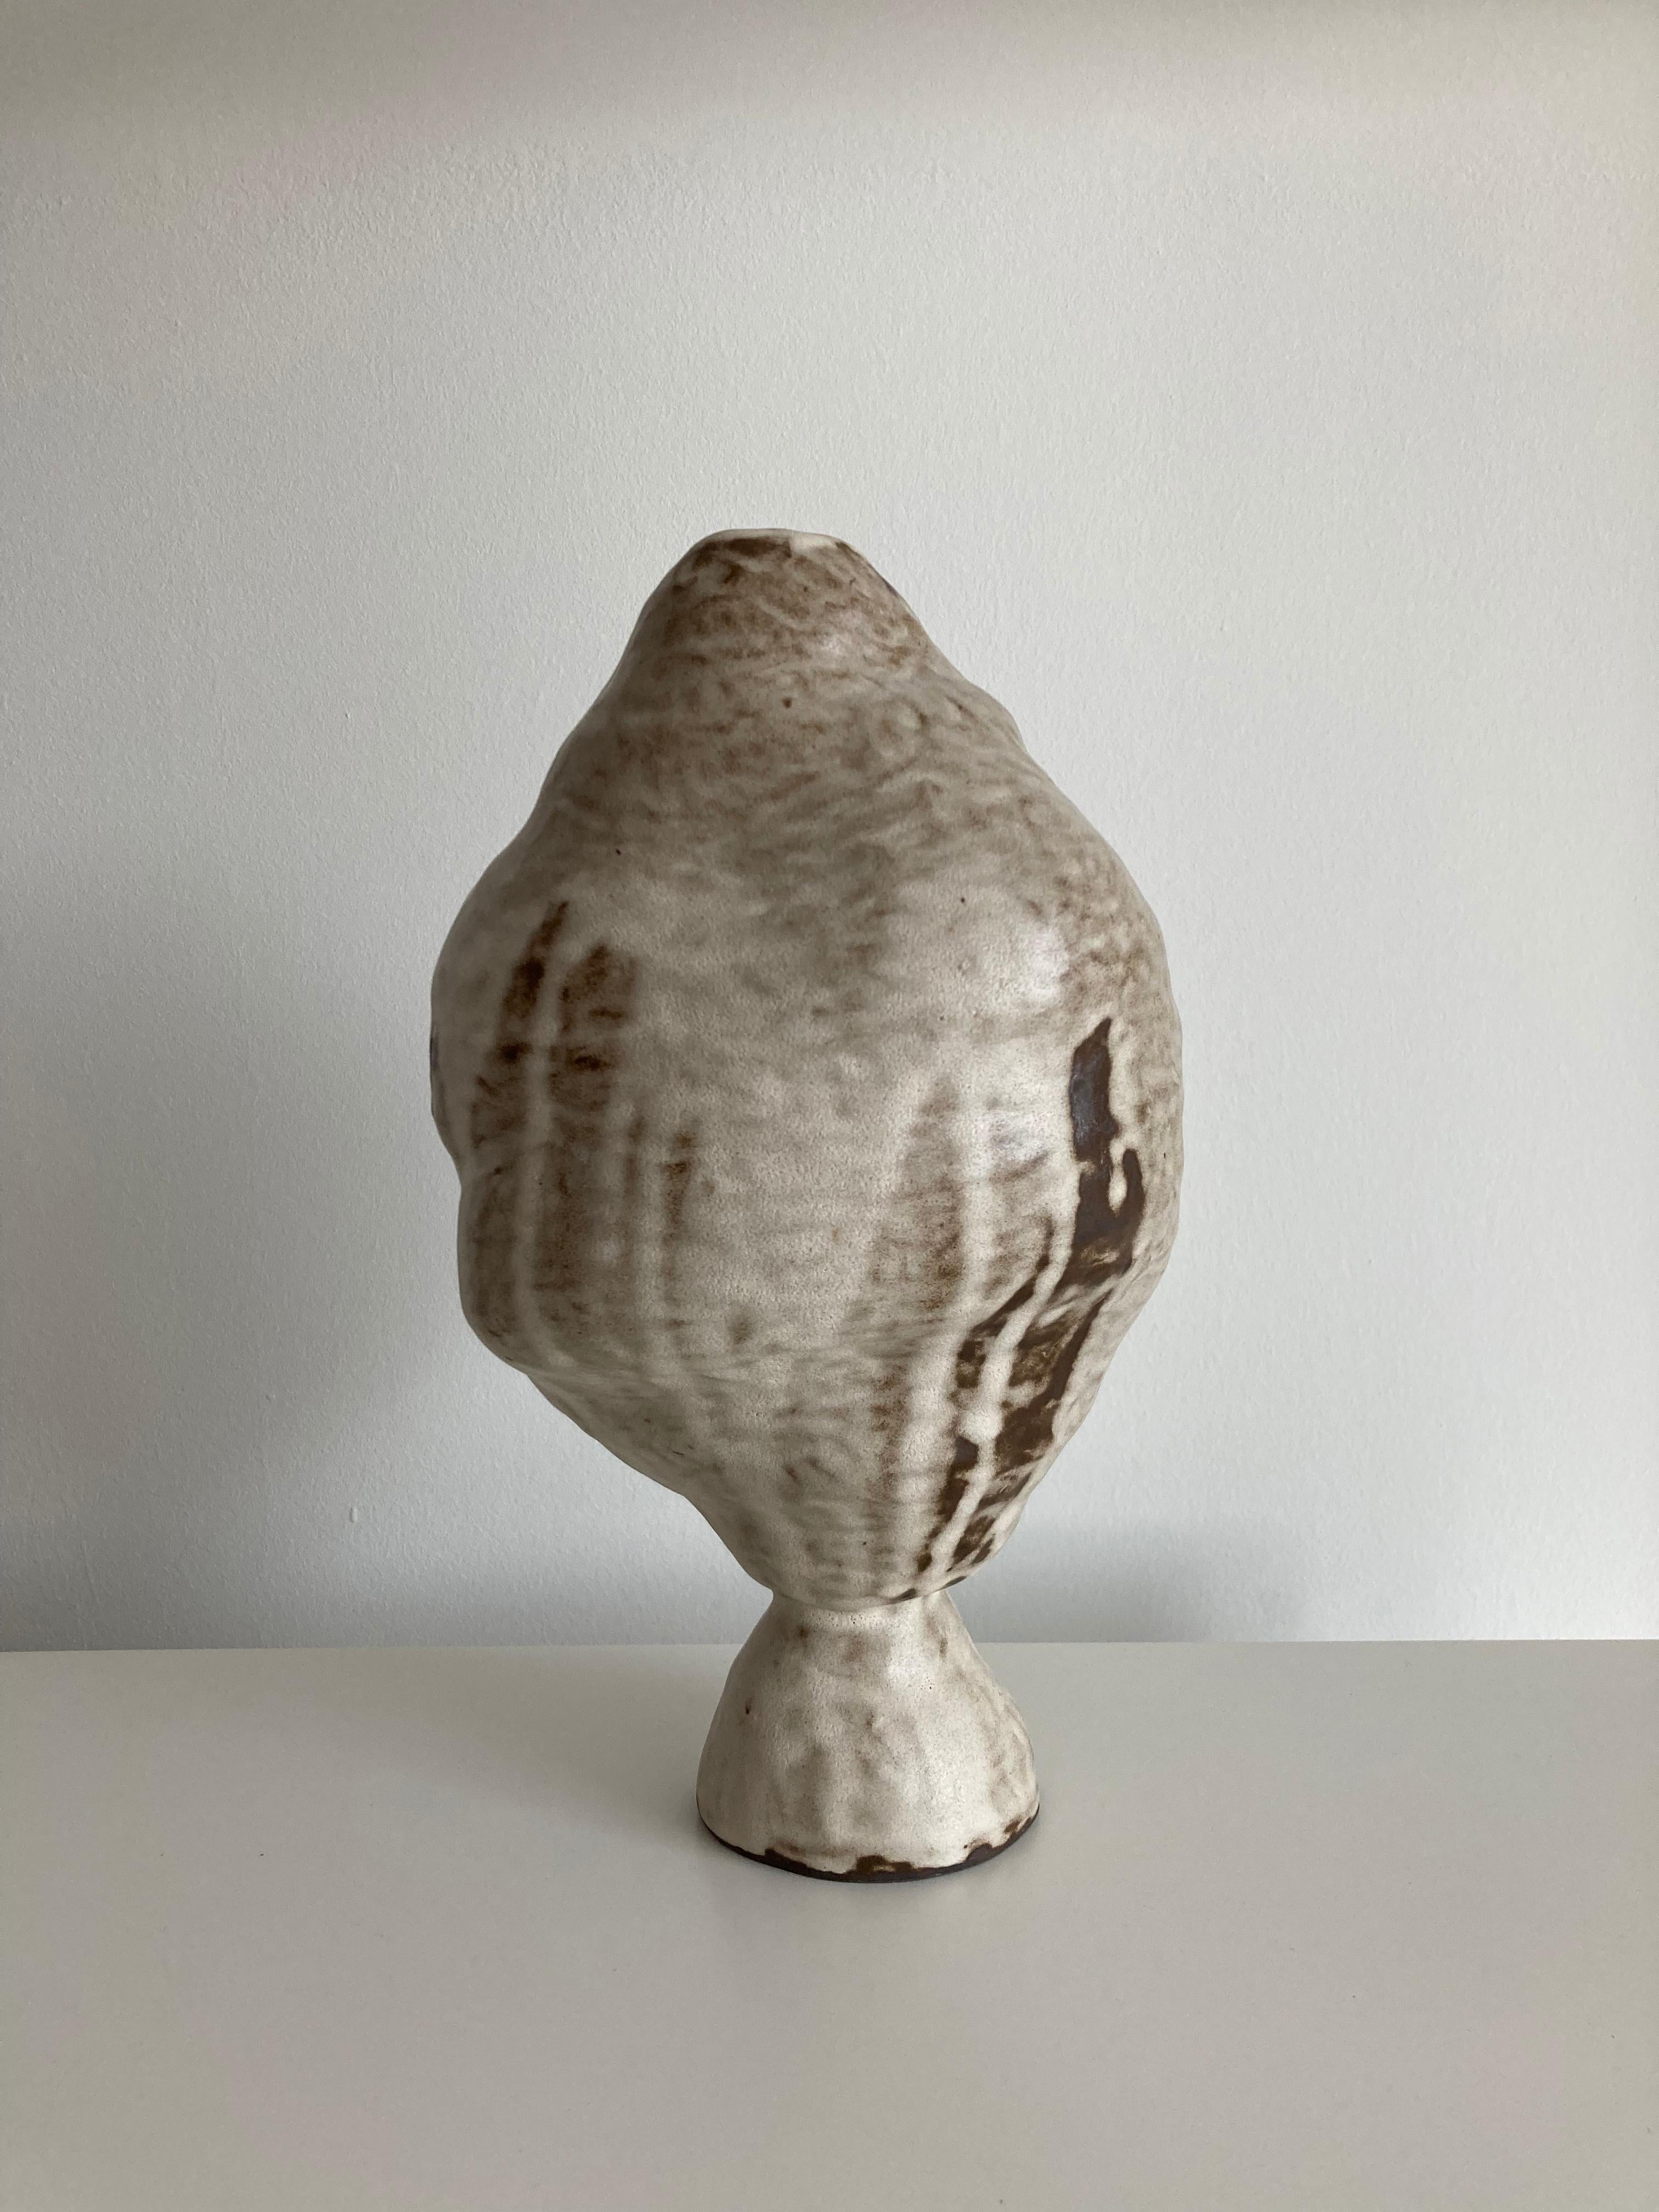 No.106 stoneware sculpture, Tonfisk by Ciona Lee 
One of a Kind
Dimensions: Ø 17 x H 28 cm
Materials: Black stoneware, satin cream glaze
Variations of size and colour available,

Tonfisk is the ceramic practice by Ciona Lee, a Korean-Italian